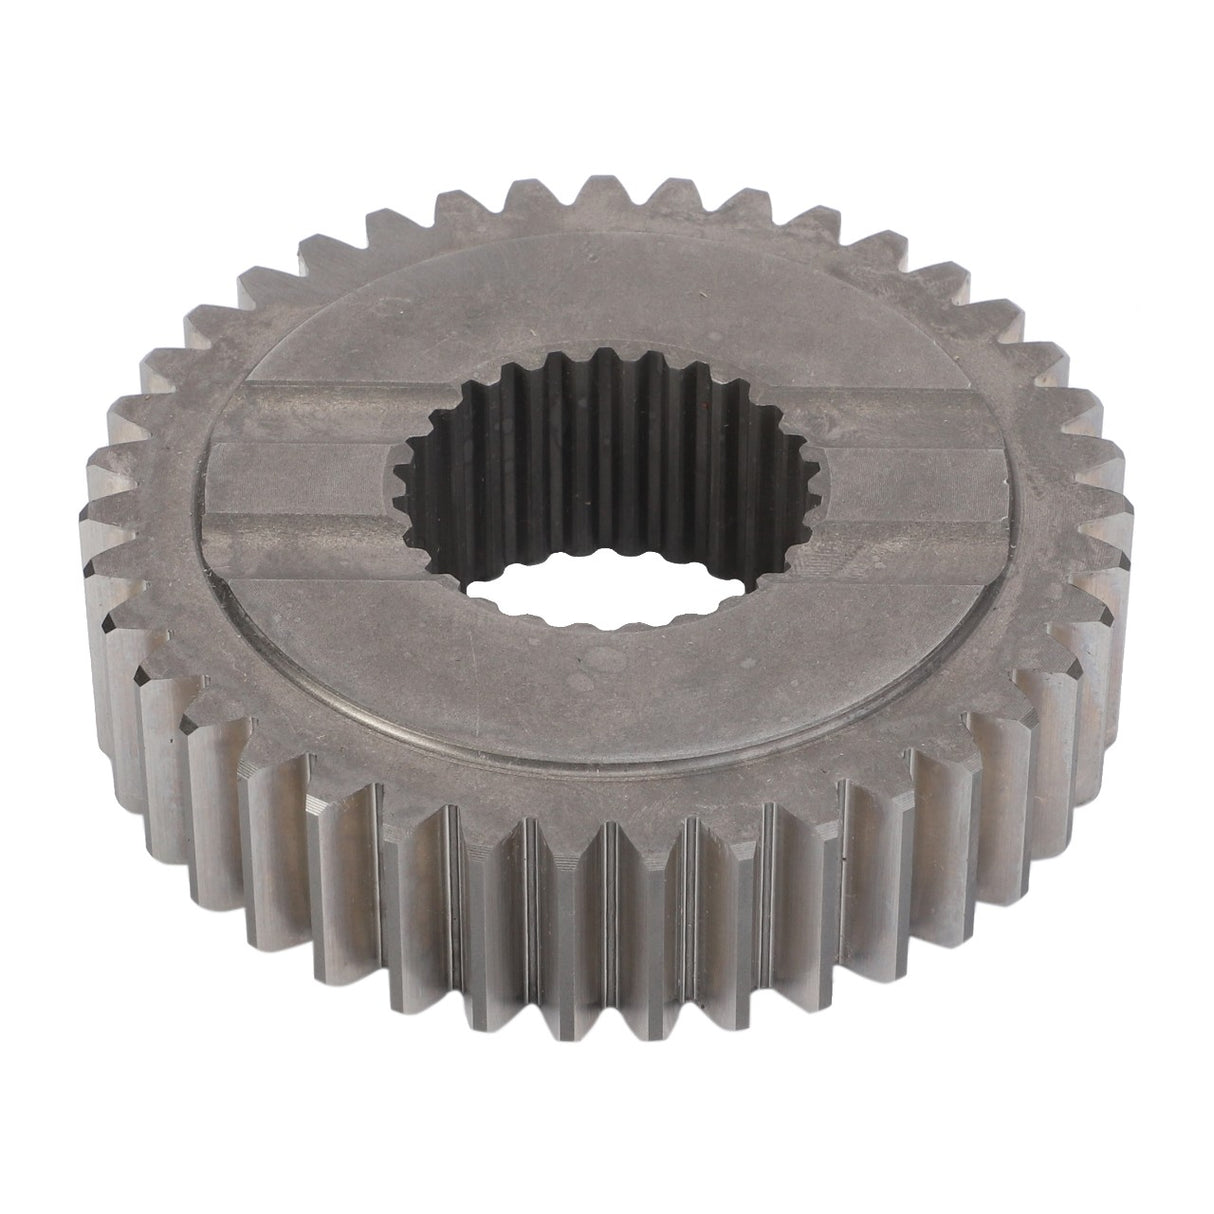 *STOCK CLEARANCE* - Pinion - 3382225M2 - Farming Parts